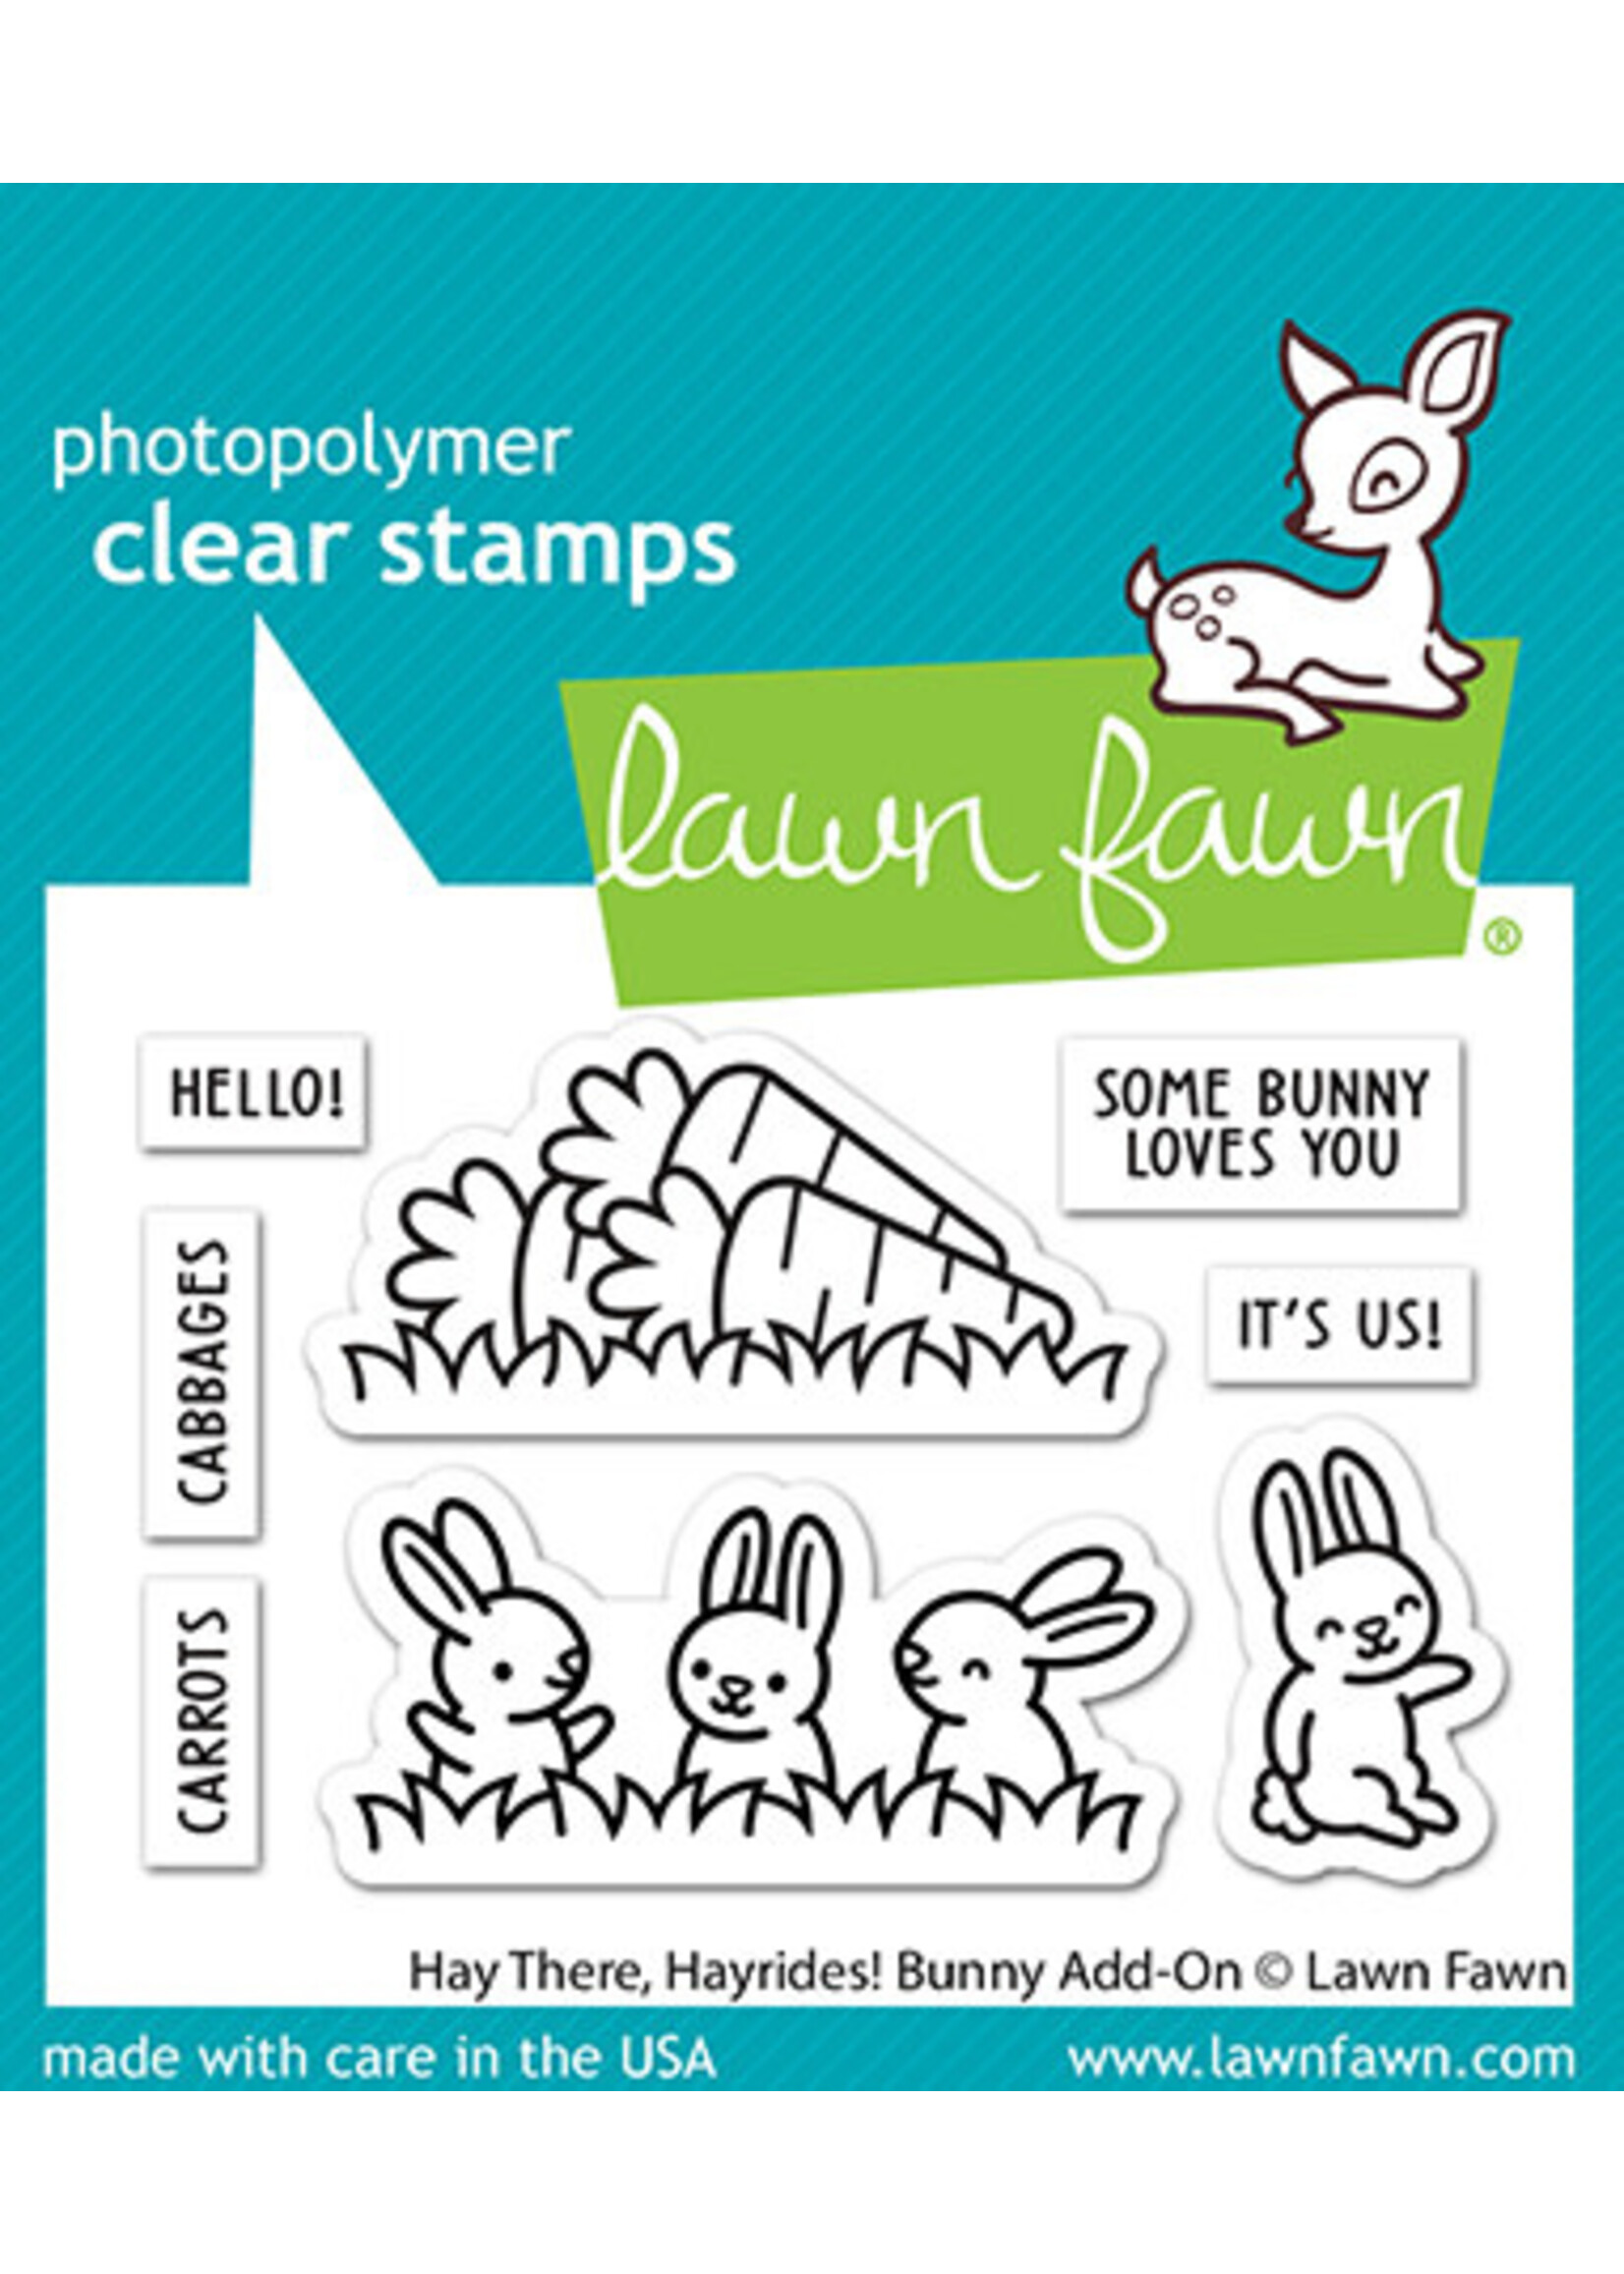 Lawn Fawn hay there, hayrides! bunny add-on